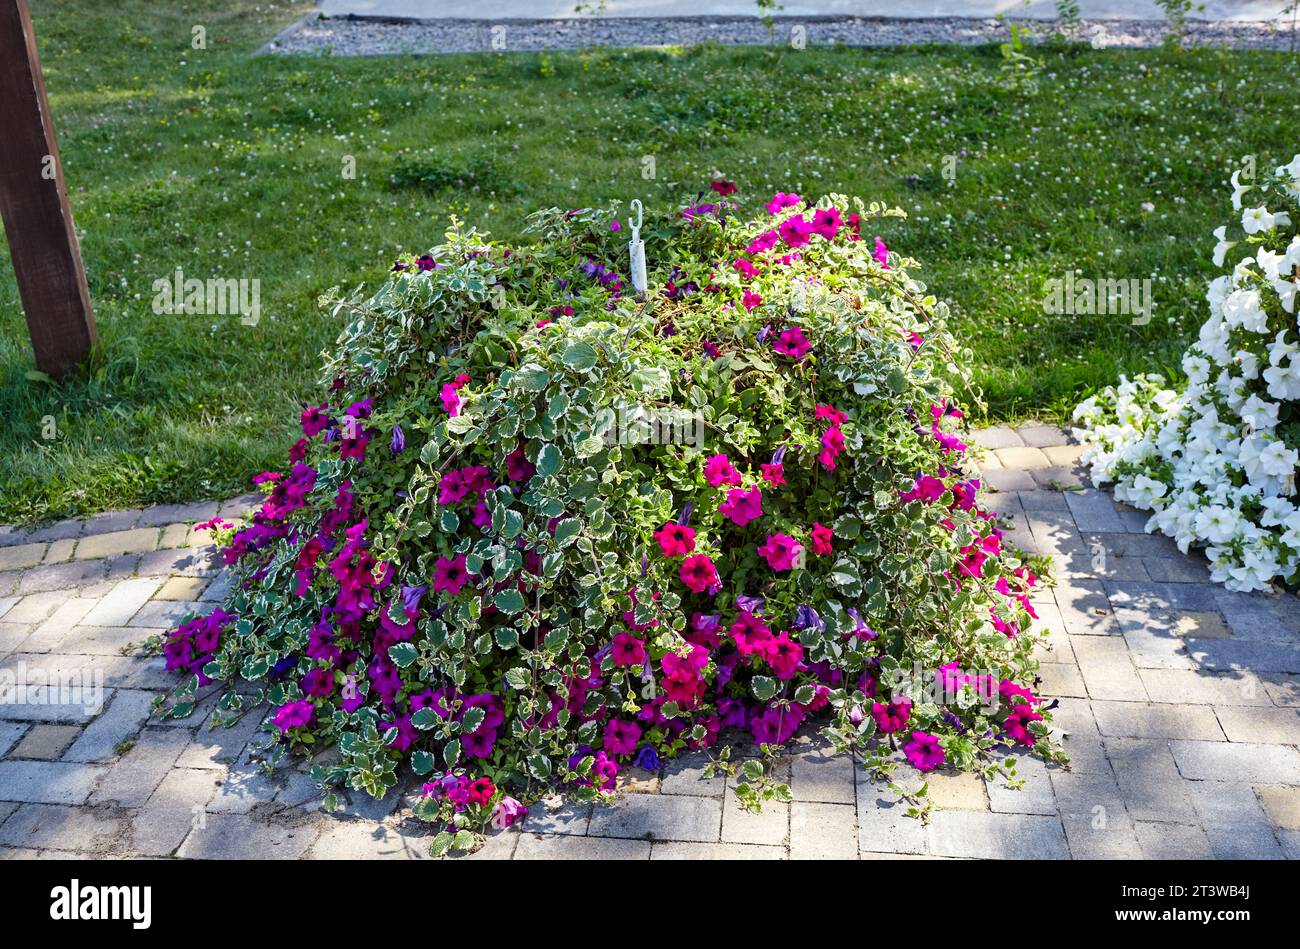 Petunias and Plectranthus (White Edged Swedish Ivy) in city garden. Lush blooming colorful common garden flowers in city park. Selective focus Stock Photo